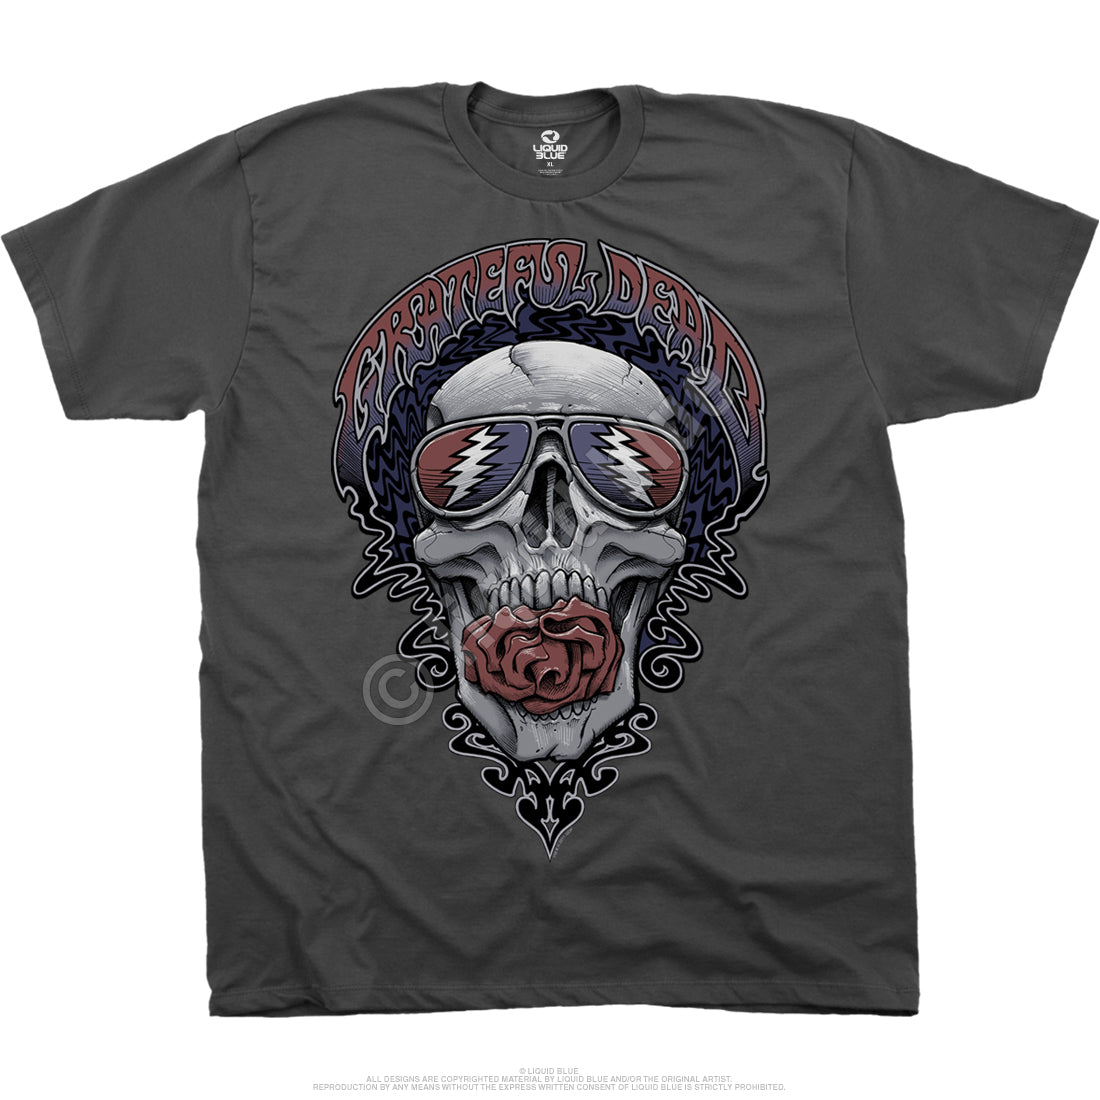 Grateful Dead Steal Your Shades Tee